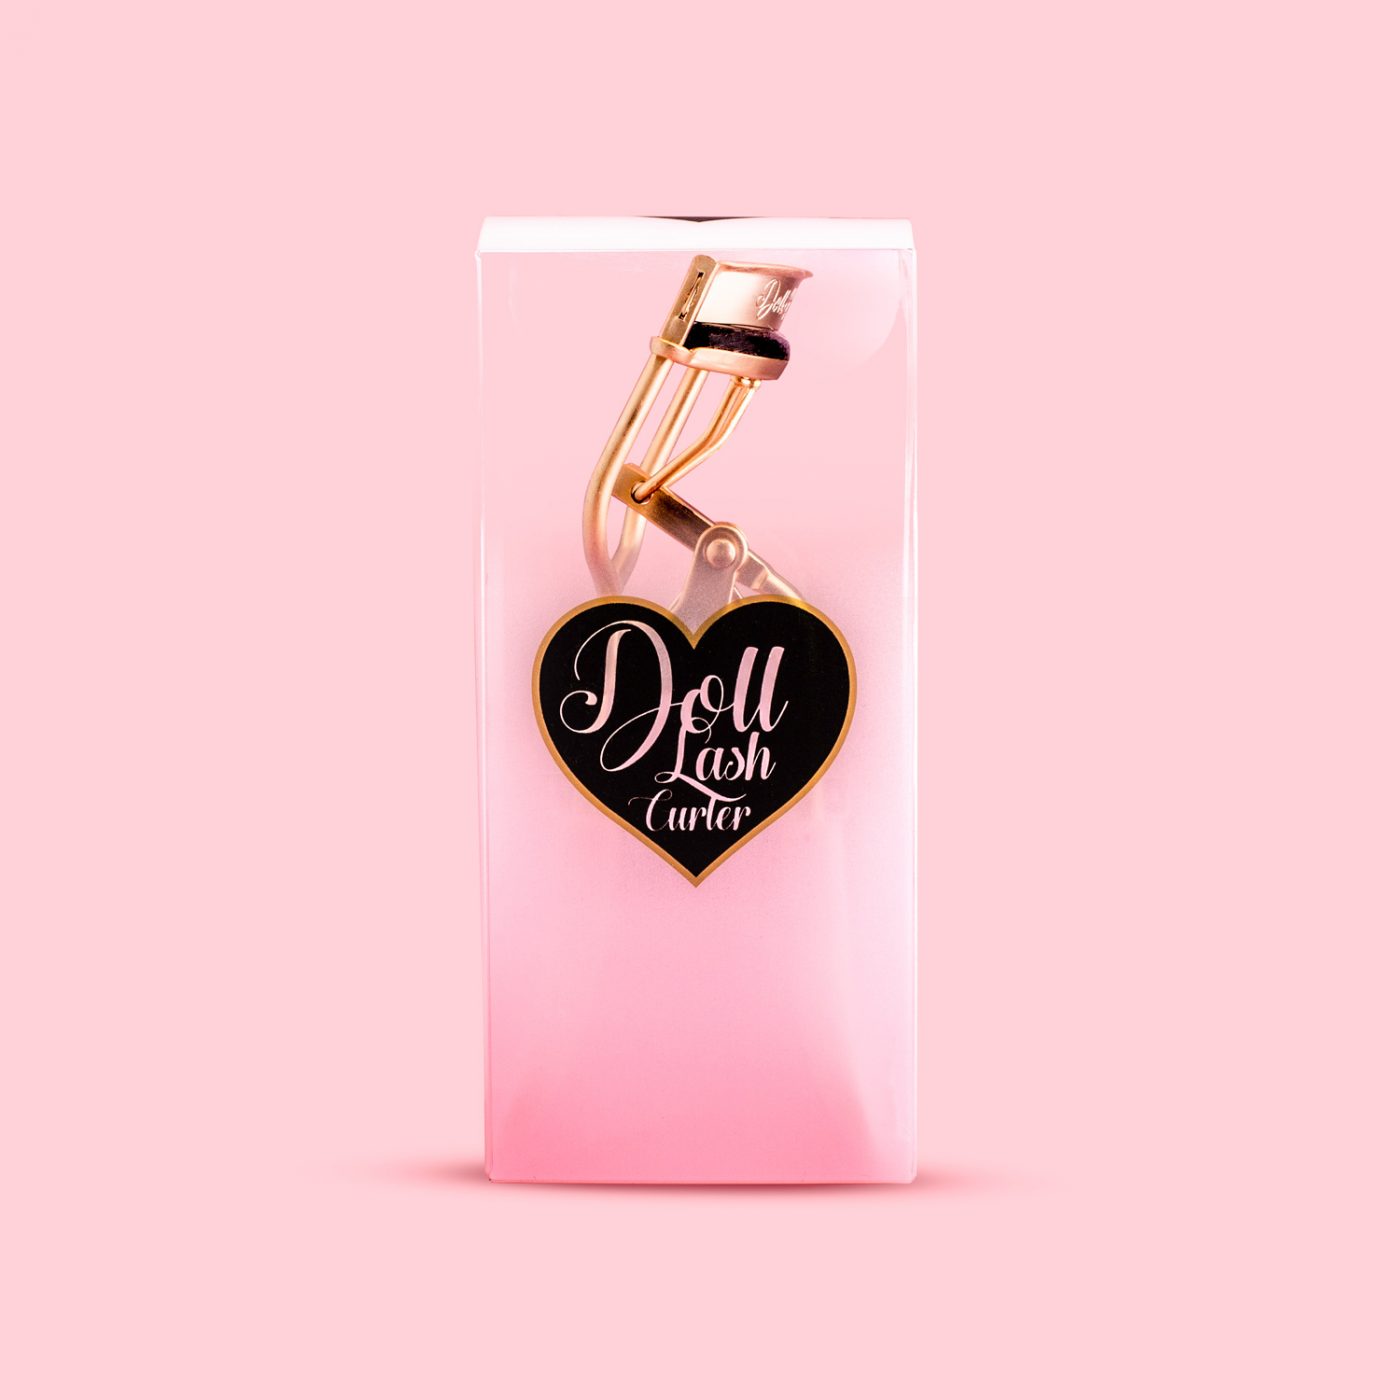 DOLL BEAUTY Curlers packaging